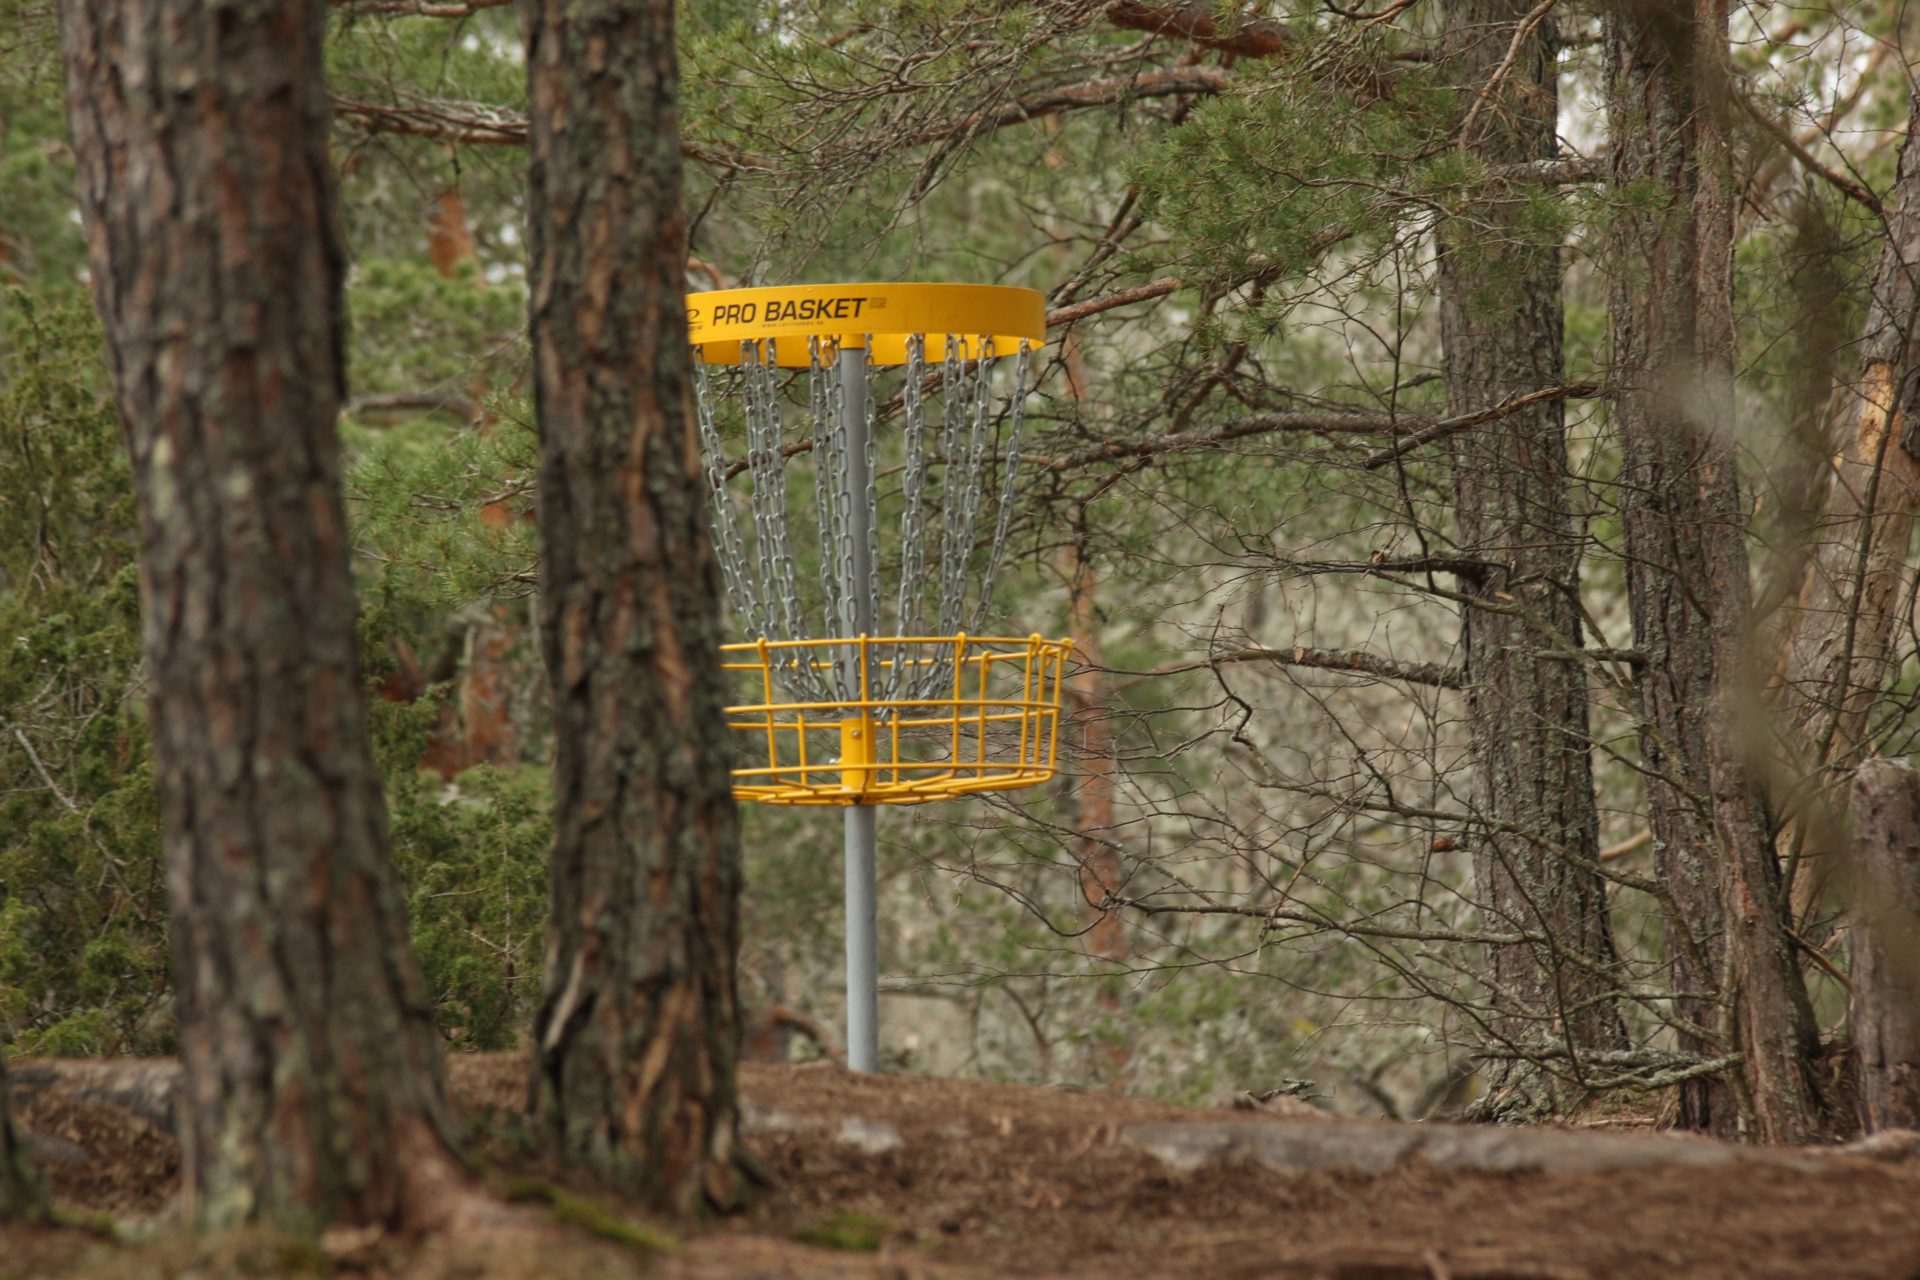 Discgolf in the woods